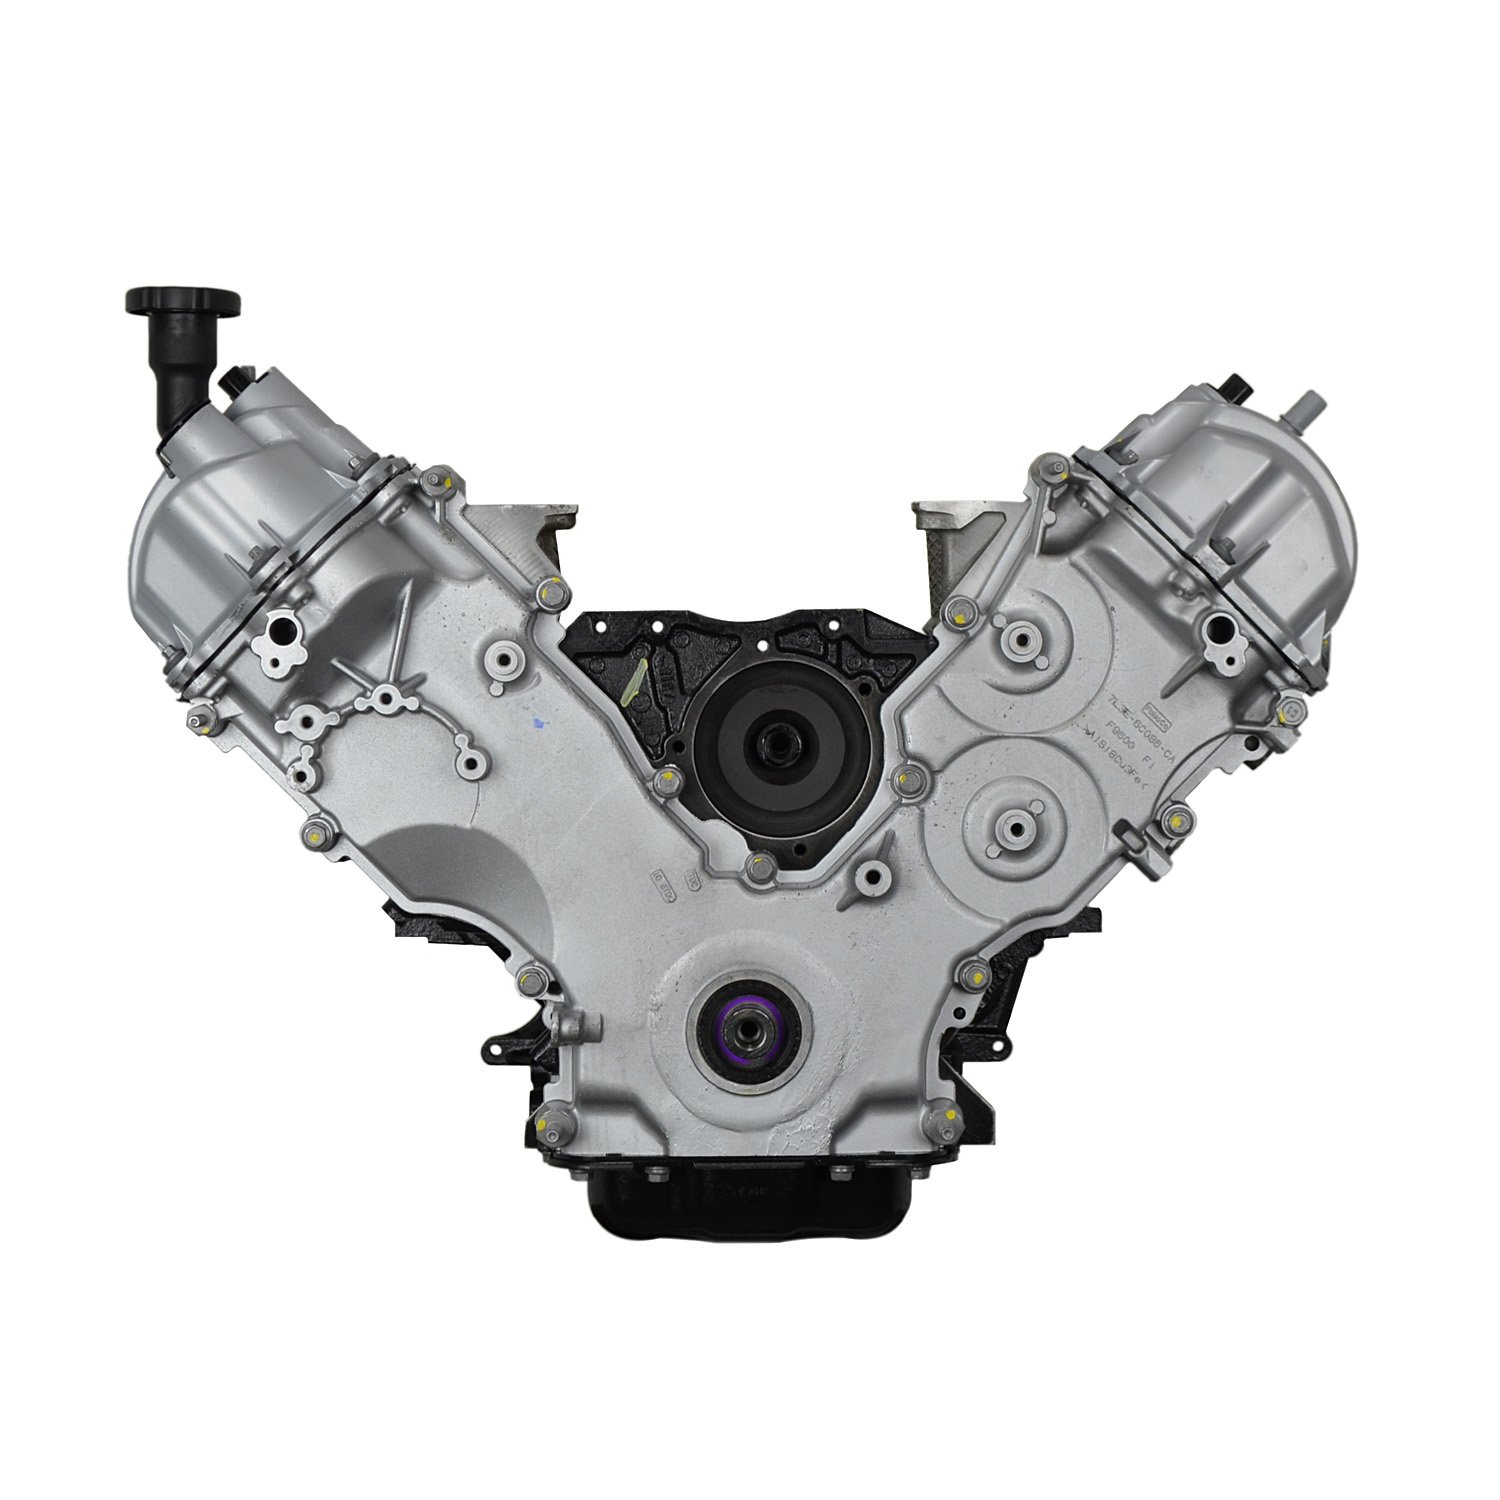 VFDN Remanufactured Crate Engine for 2007-2012 Ford F-Series Truck with 5.4L V8